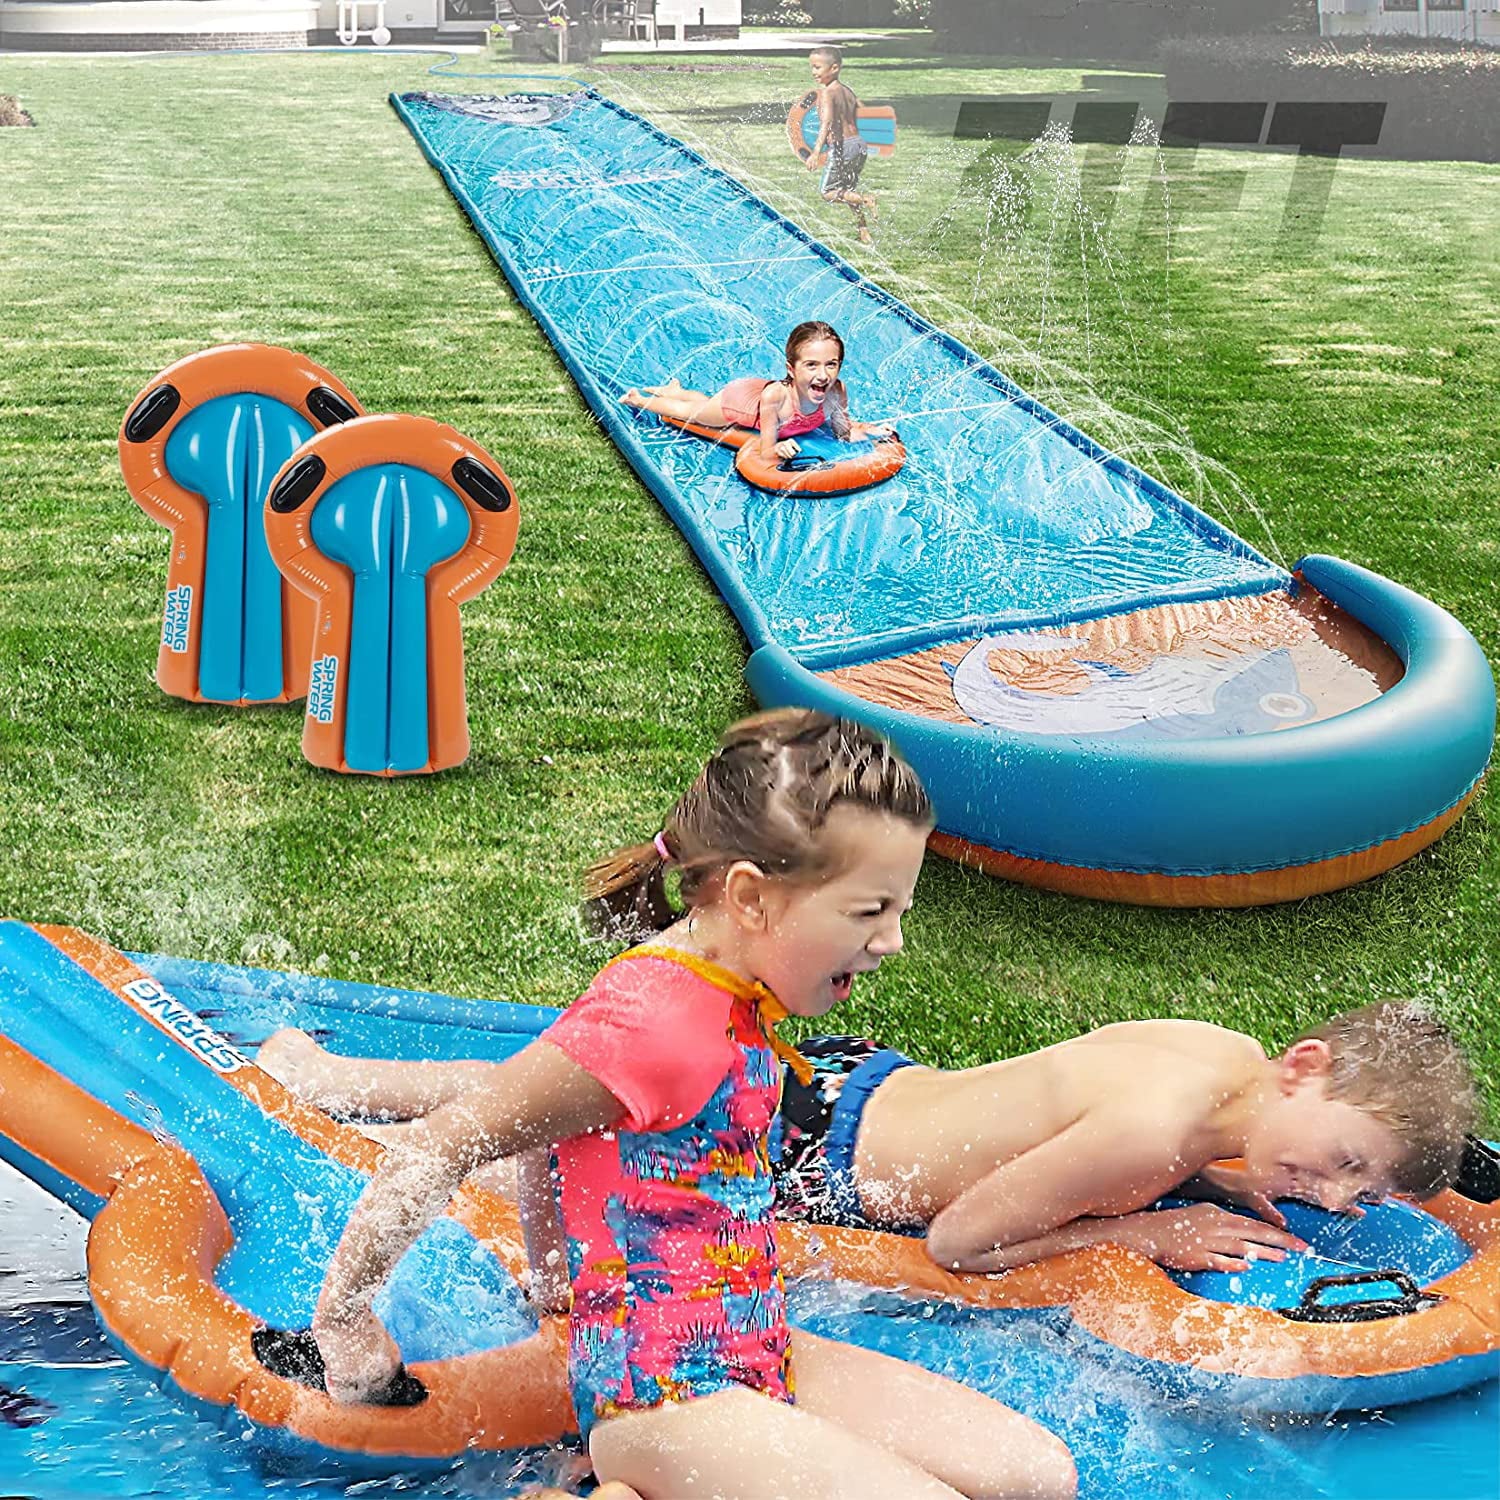 Terra Slip Water Slide, Extra Long 31ft Racing Slip for Kids And Adults Outdoor, Giant Slip Water Slide with Water Curtain in Both Side with 2 Bodyboards-Light Blue (31ft)